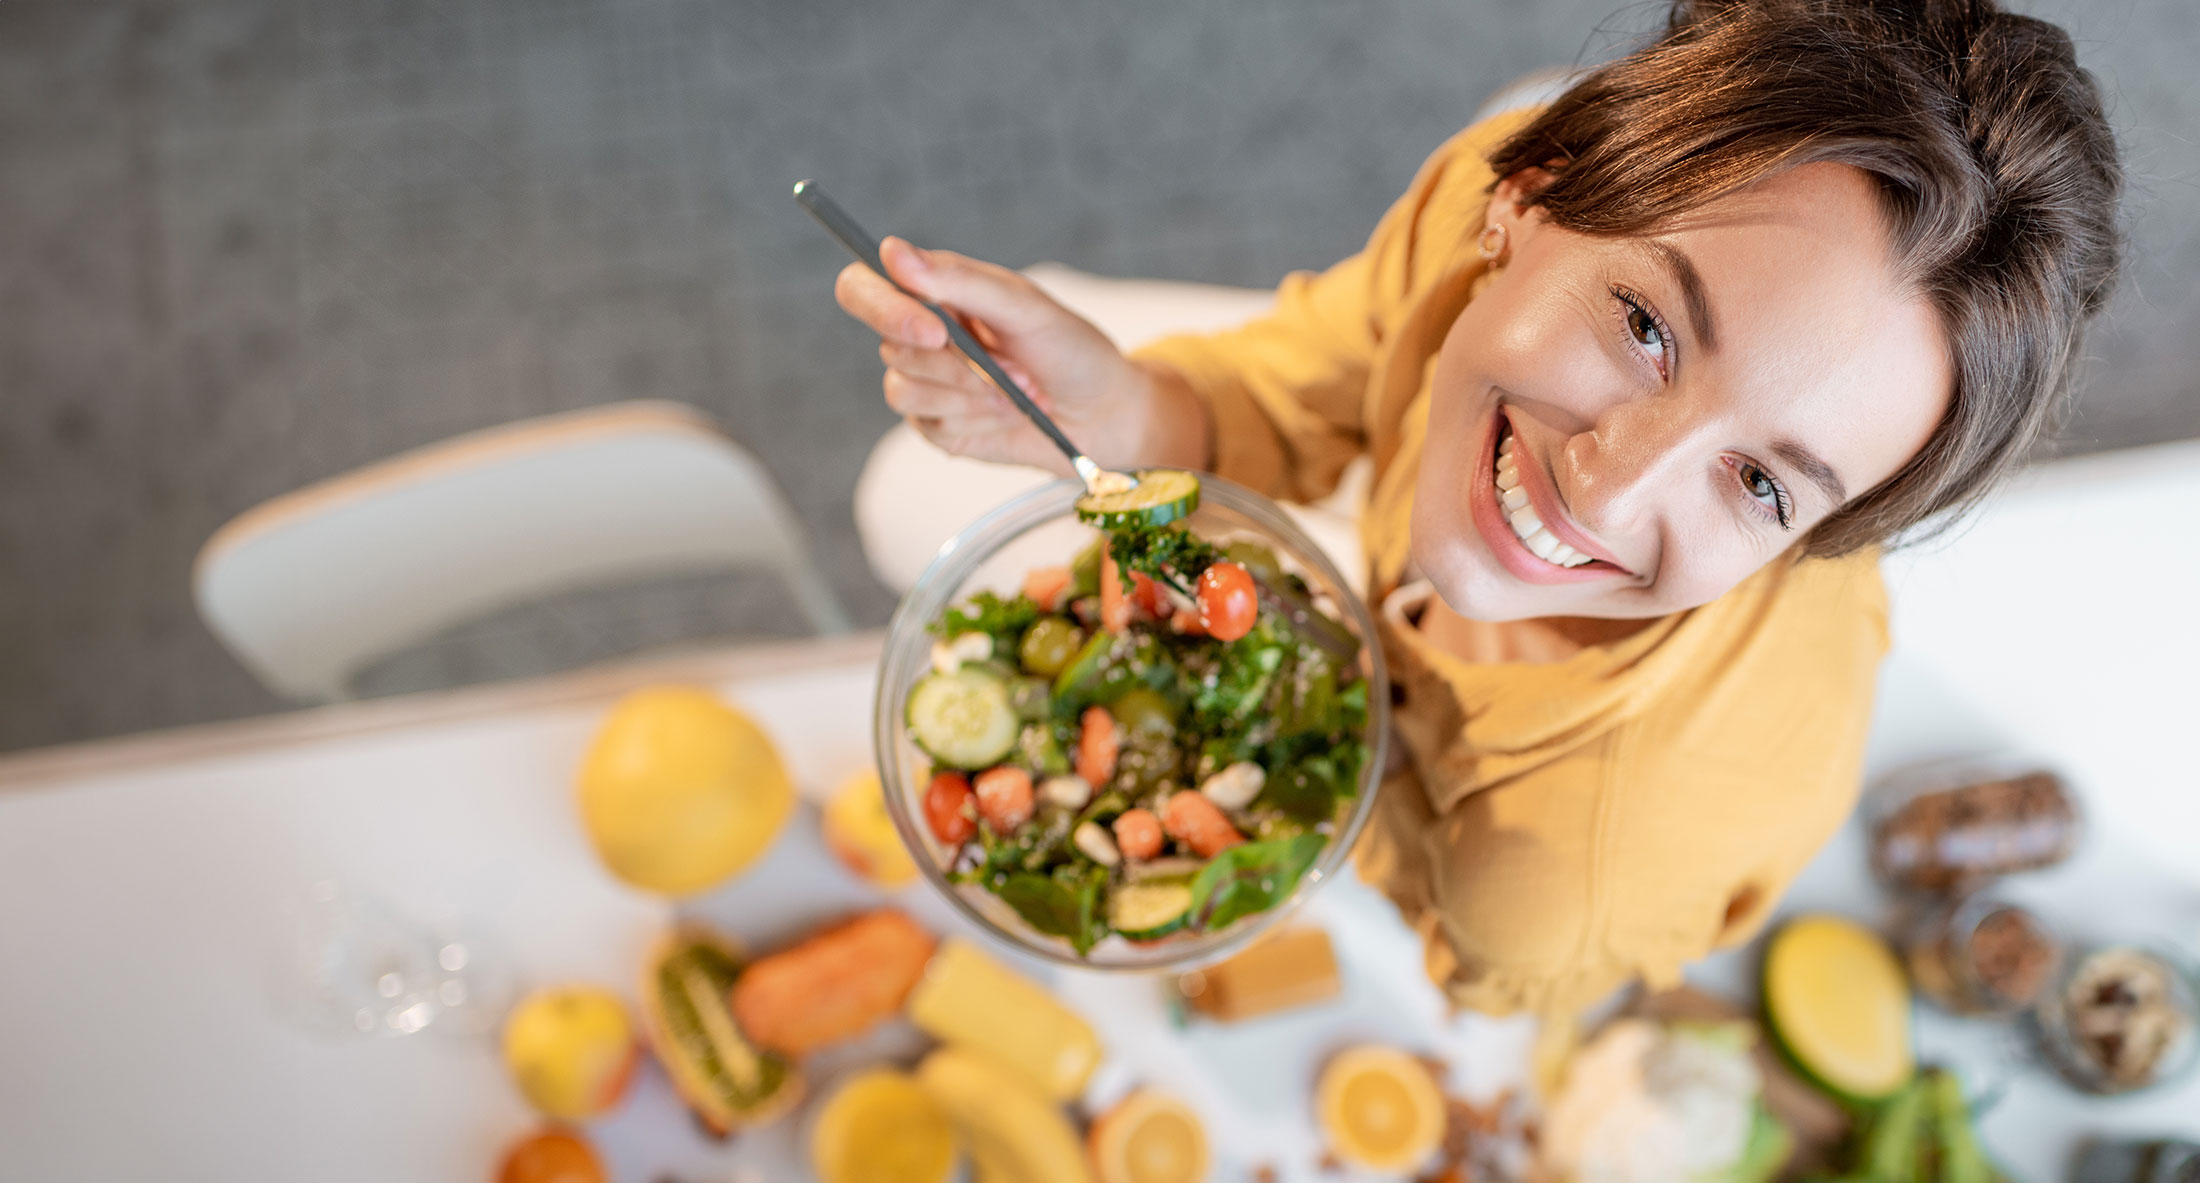 Woman smiling with a bowl of salad.